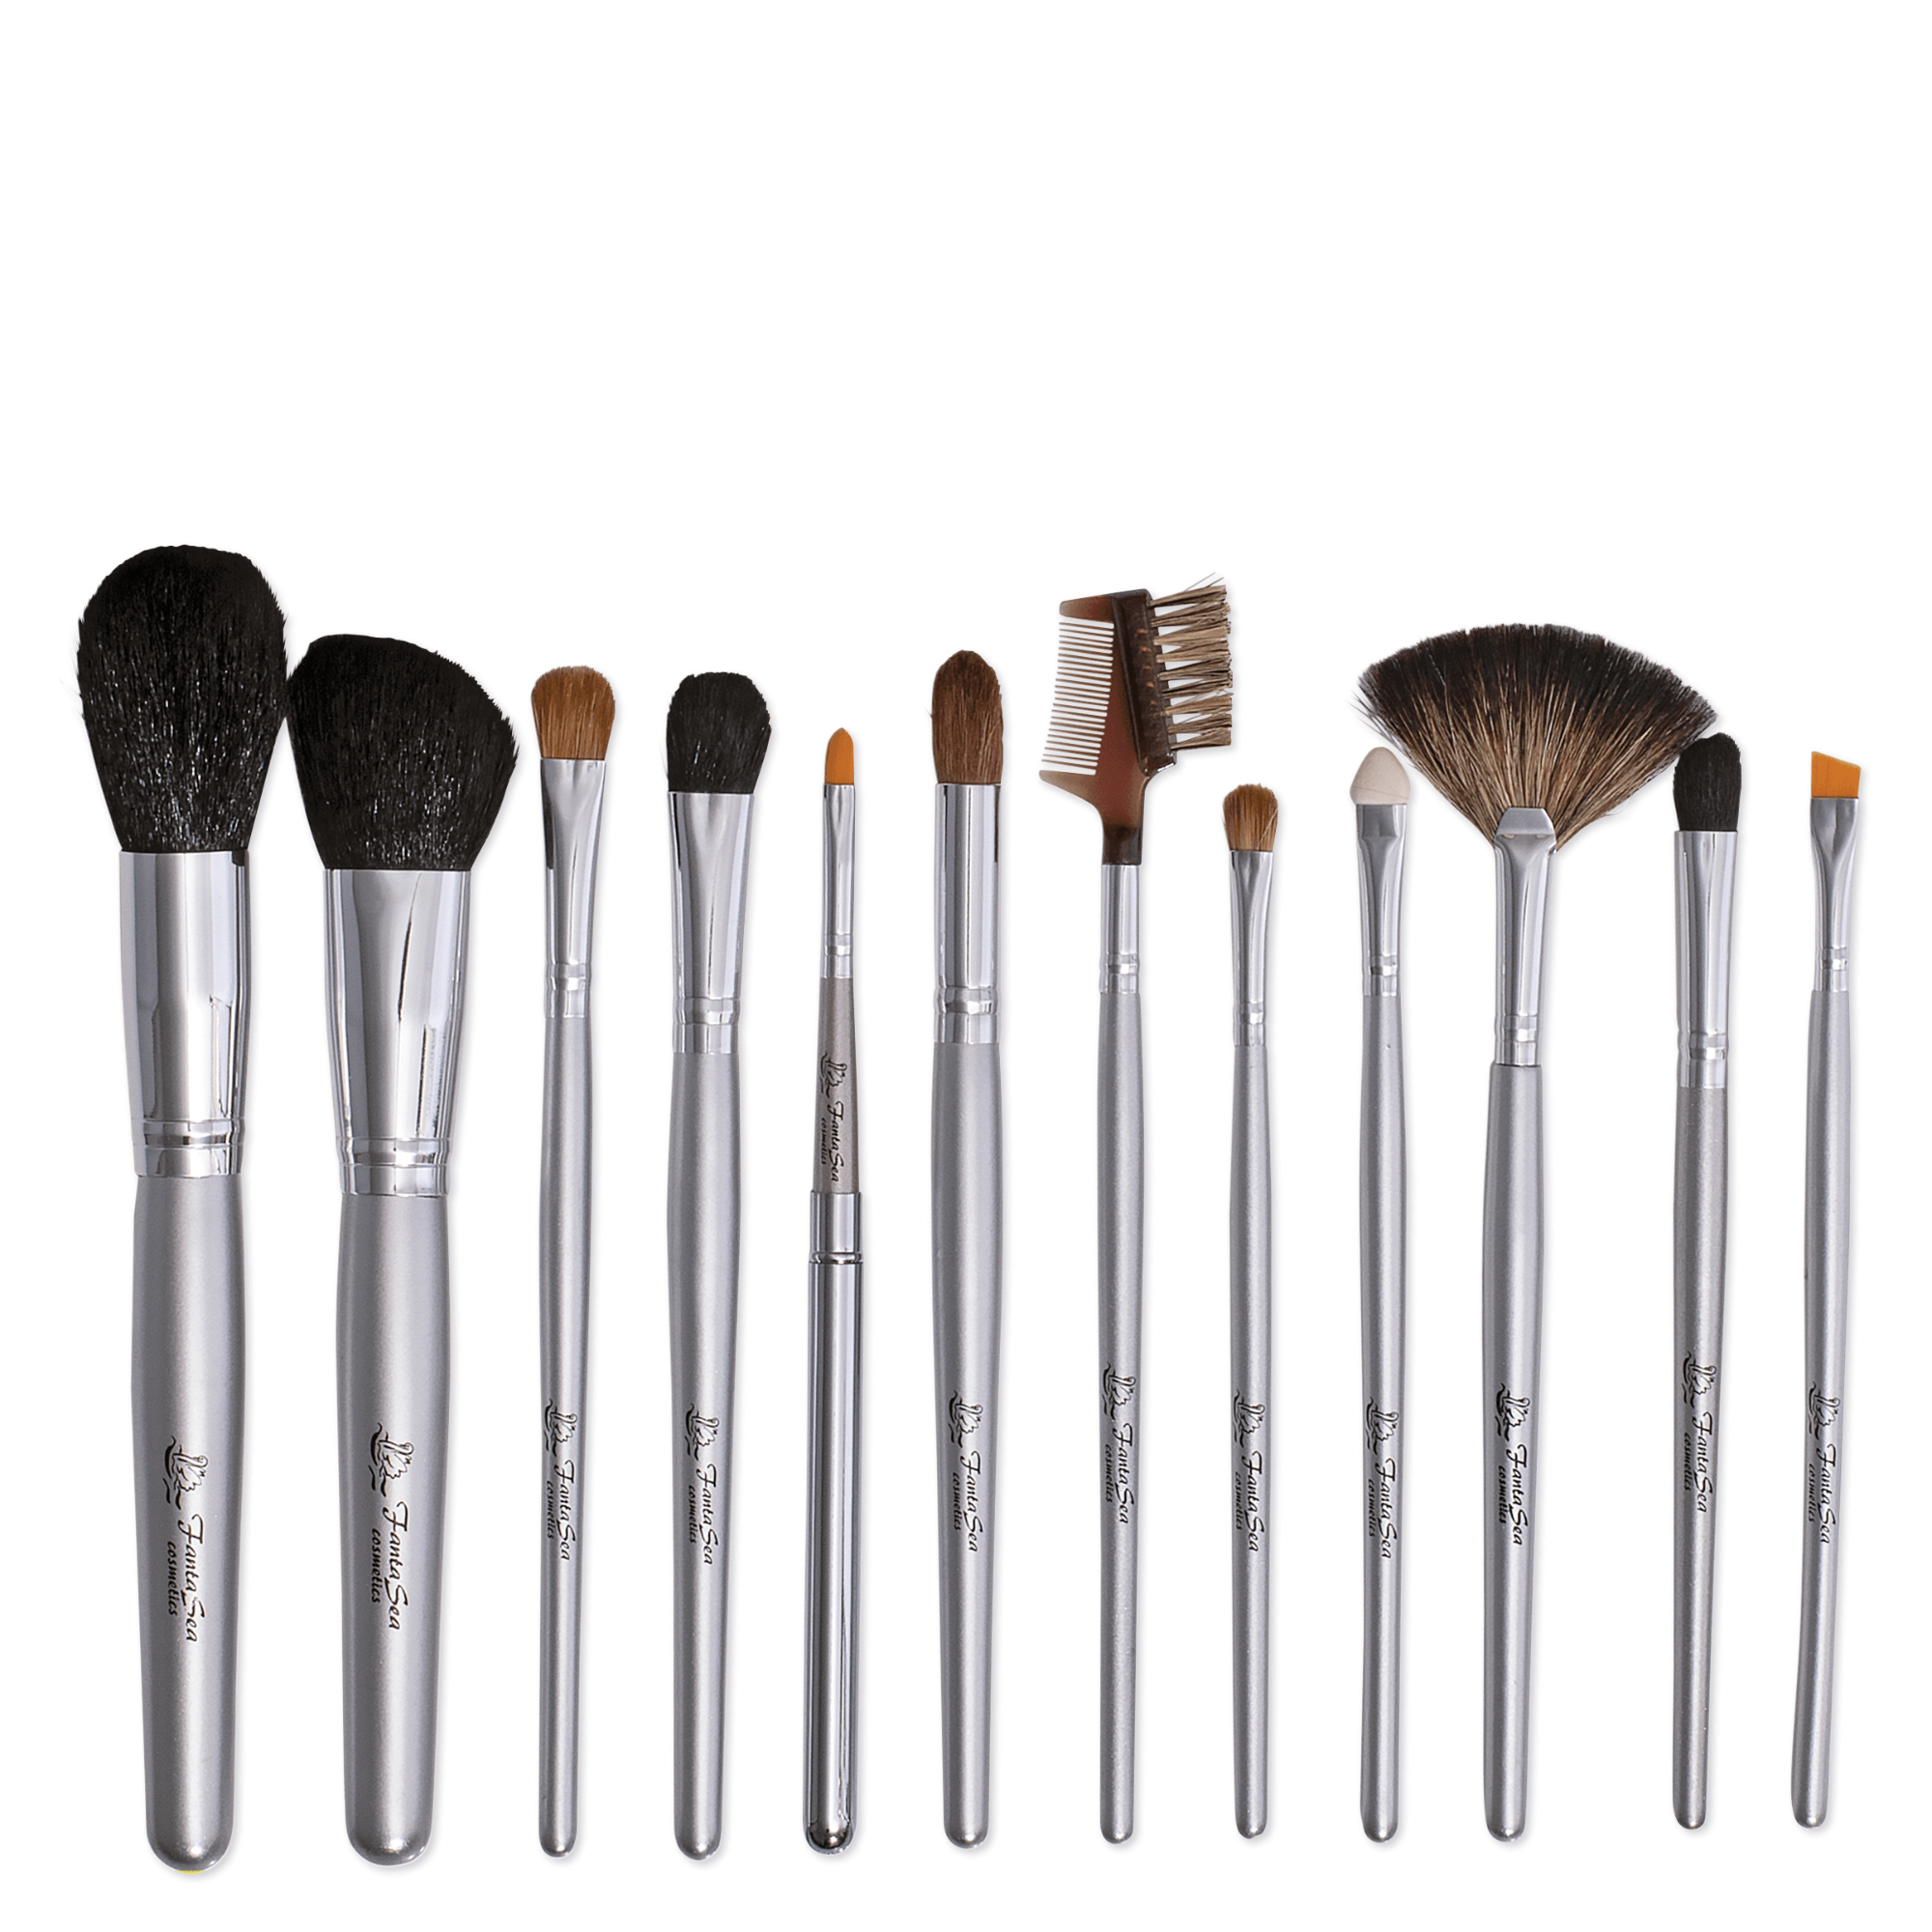 Makeup Brush Set with Case - 12 pc.